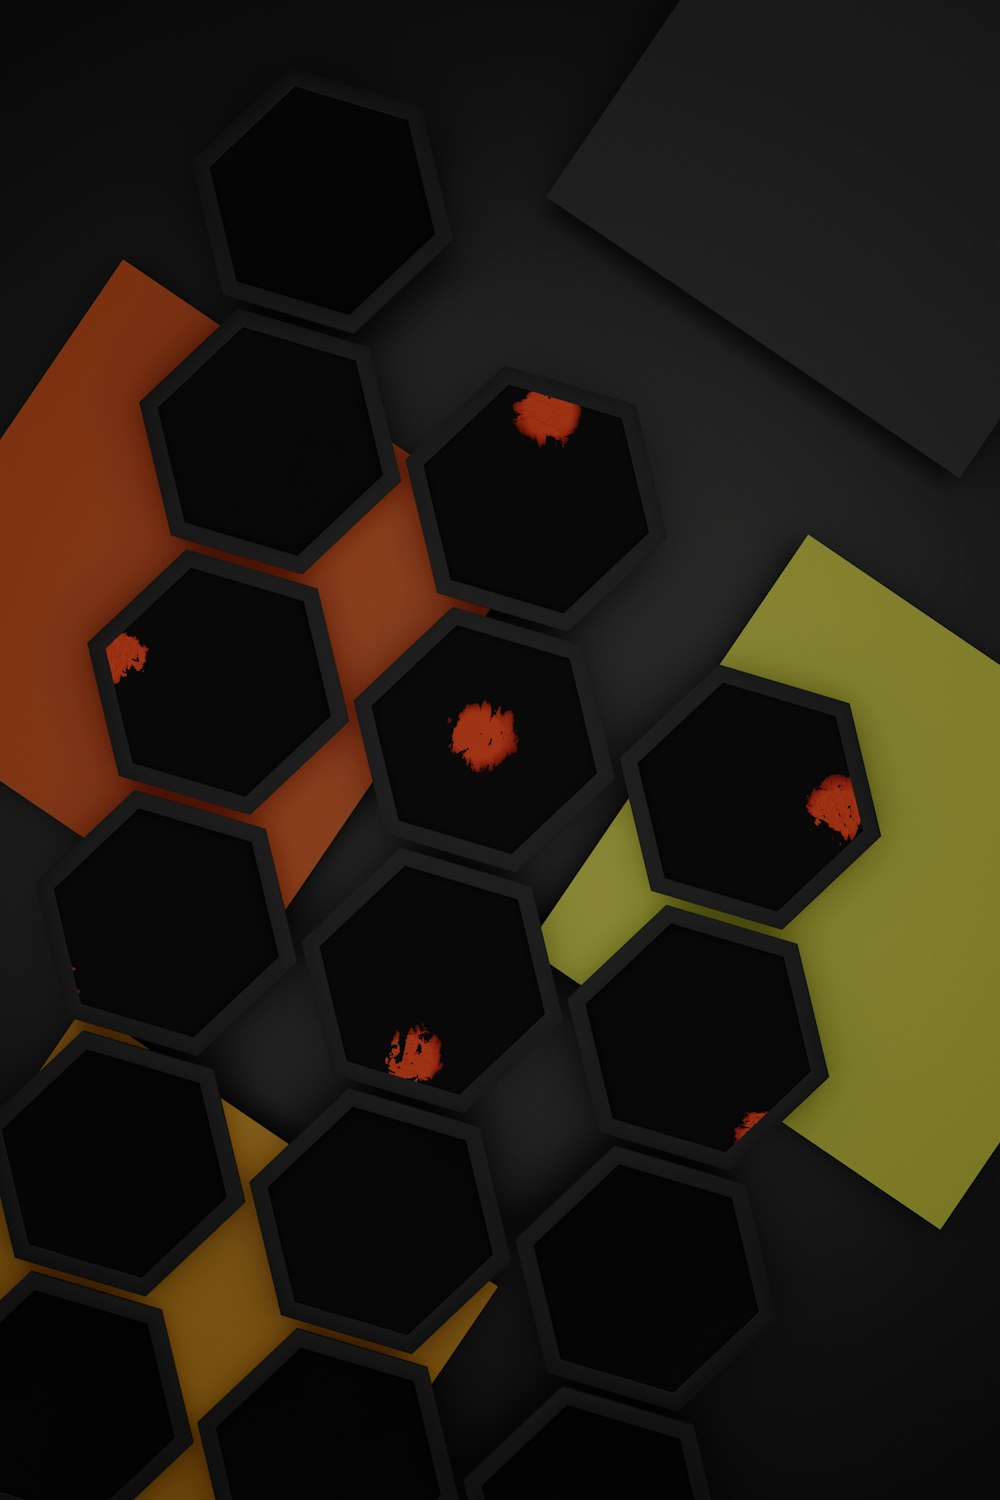 a bunch of hexagons are arranged on a black surface